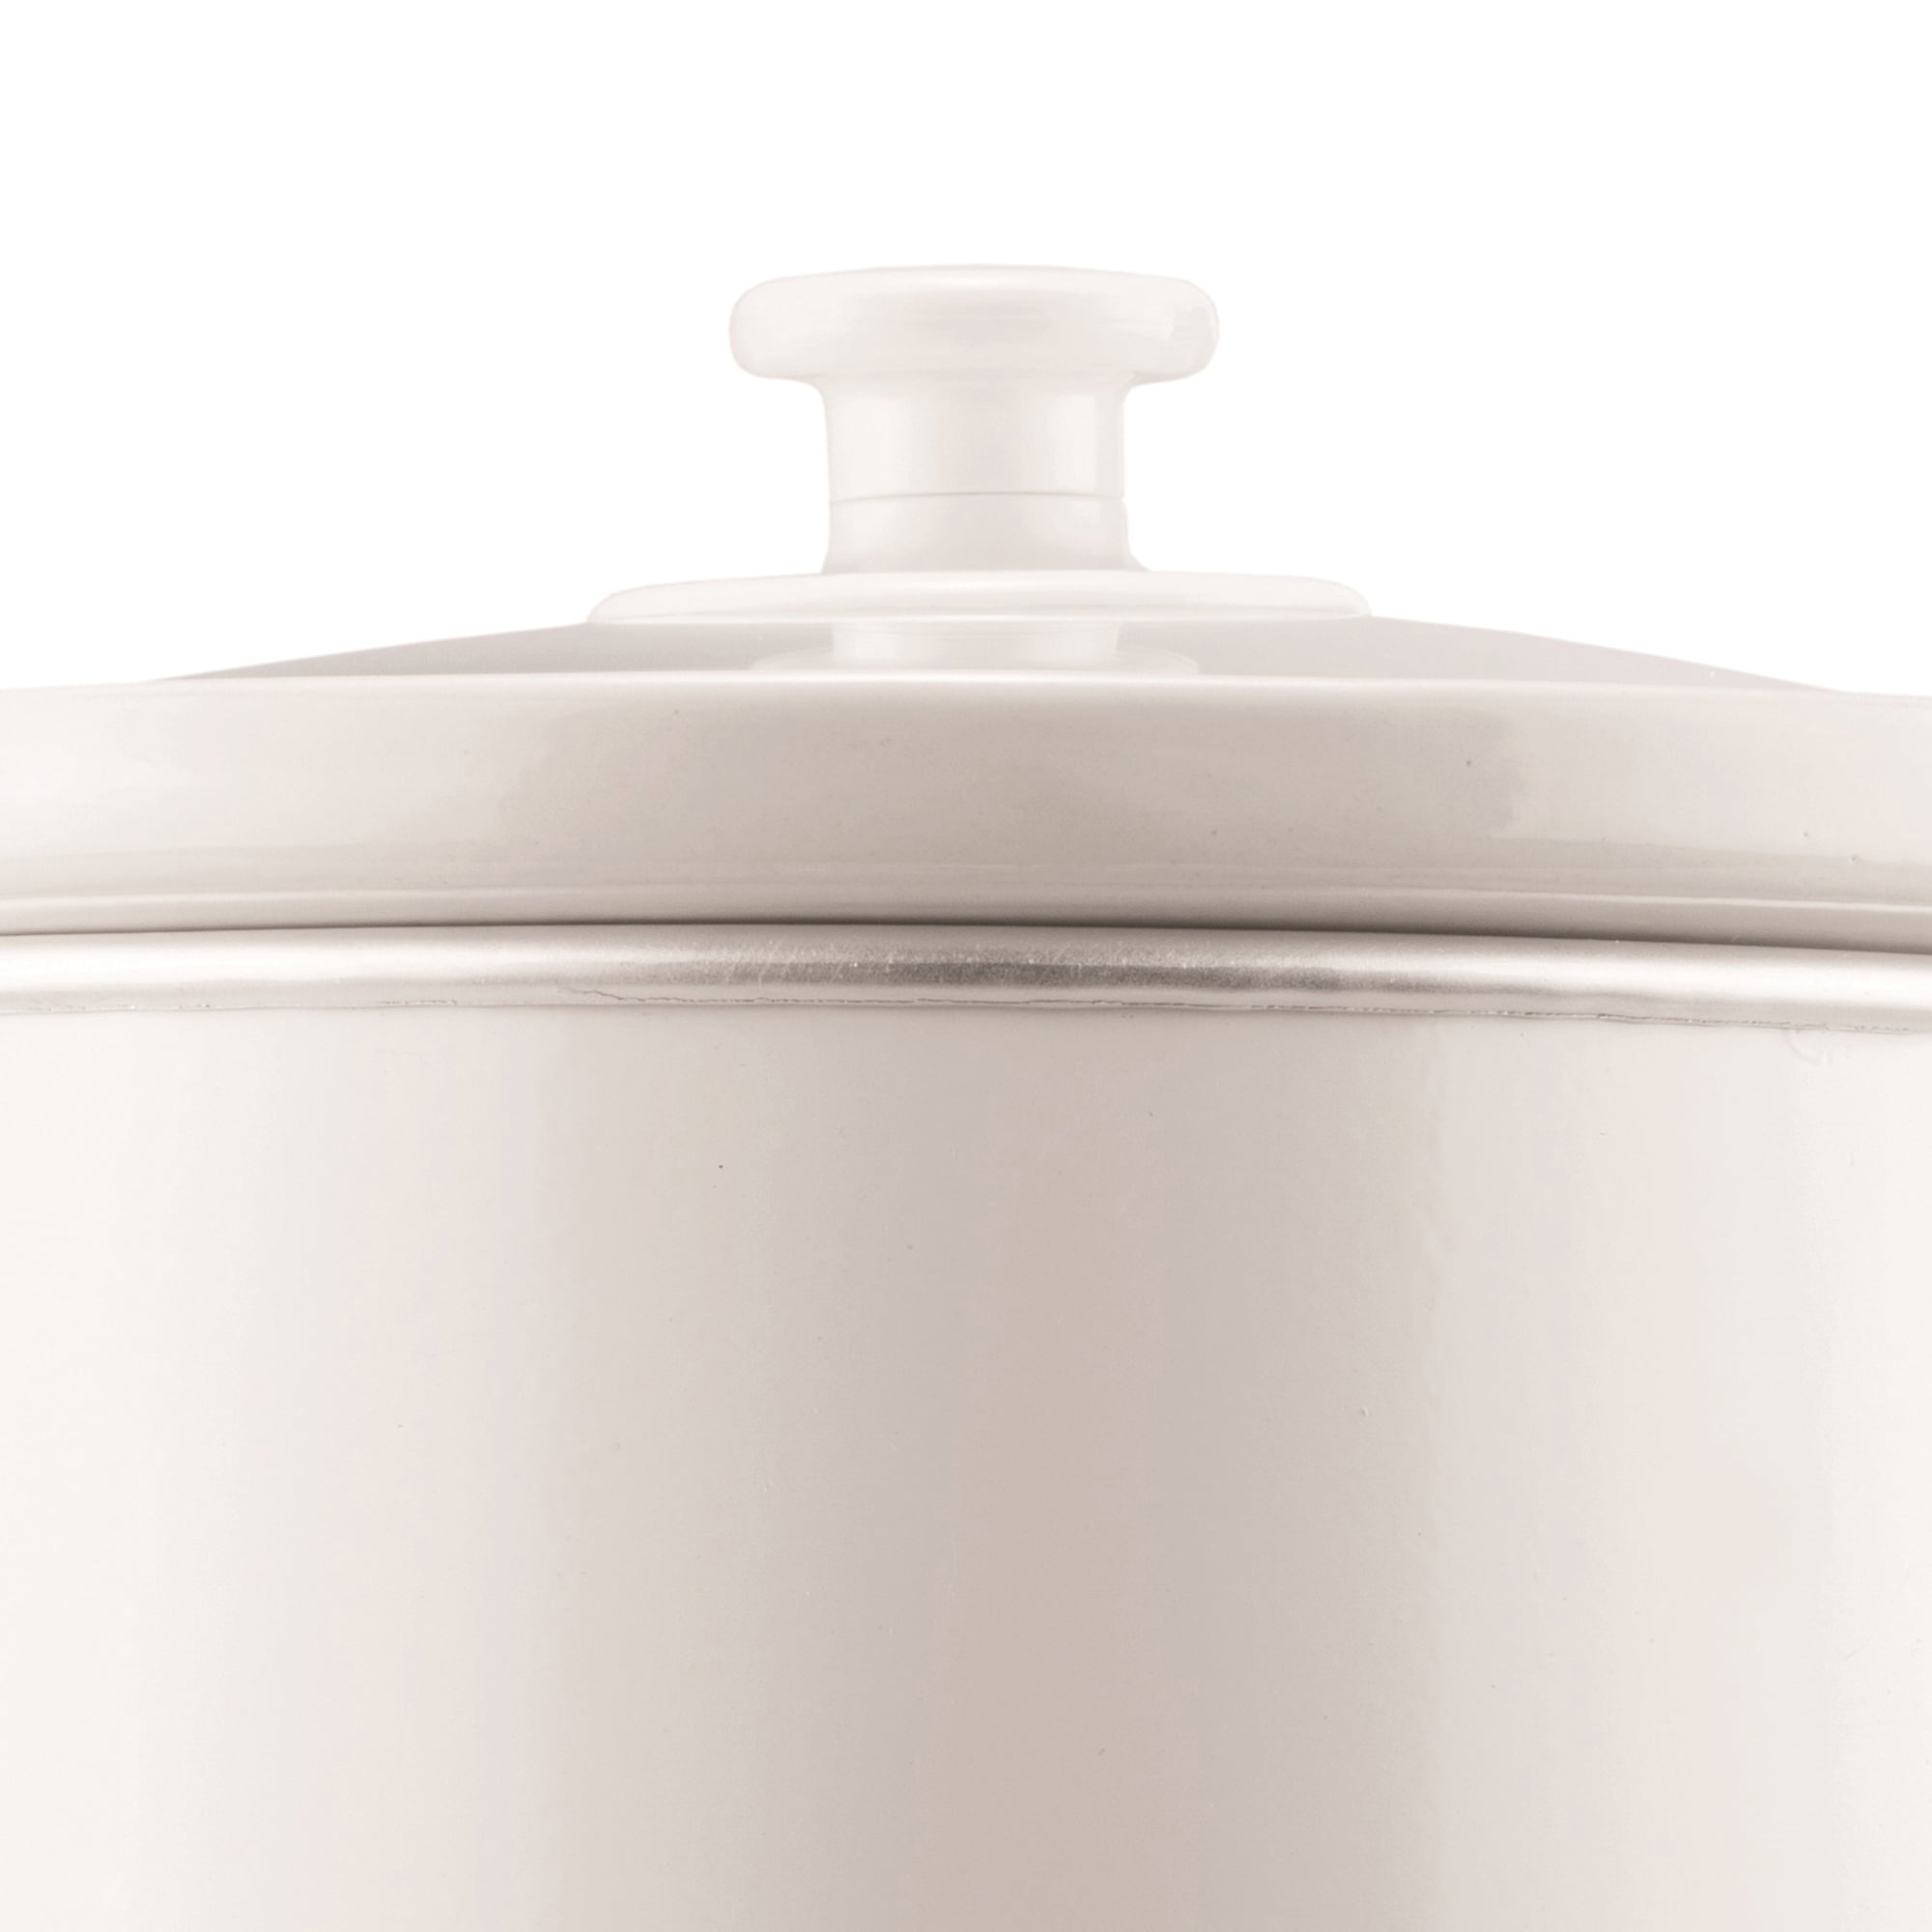 Brentwood Appliances 3.5 Qt. Stainless Steel Slow Cooker with Tempered  Glass Lid 985114779M - The Home Depot